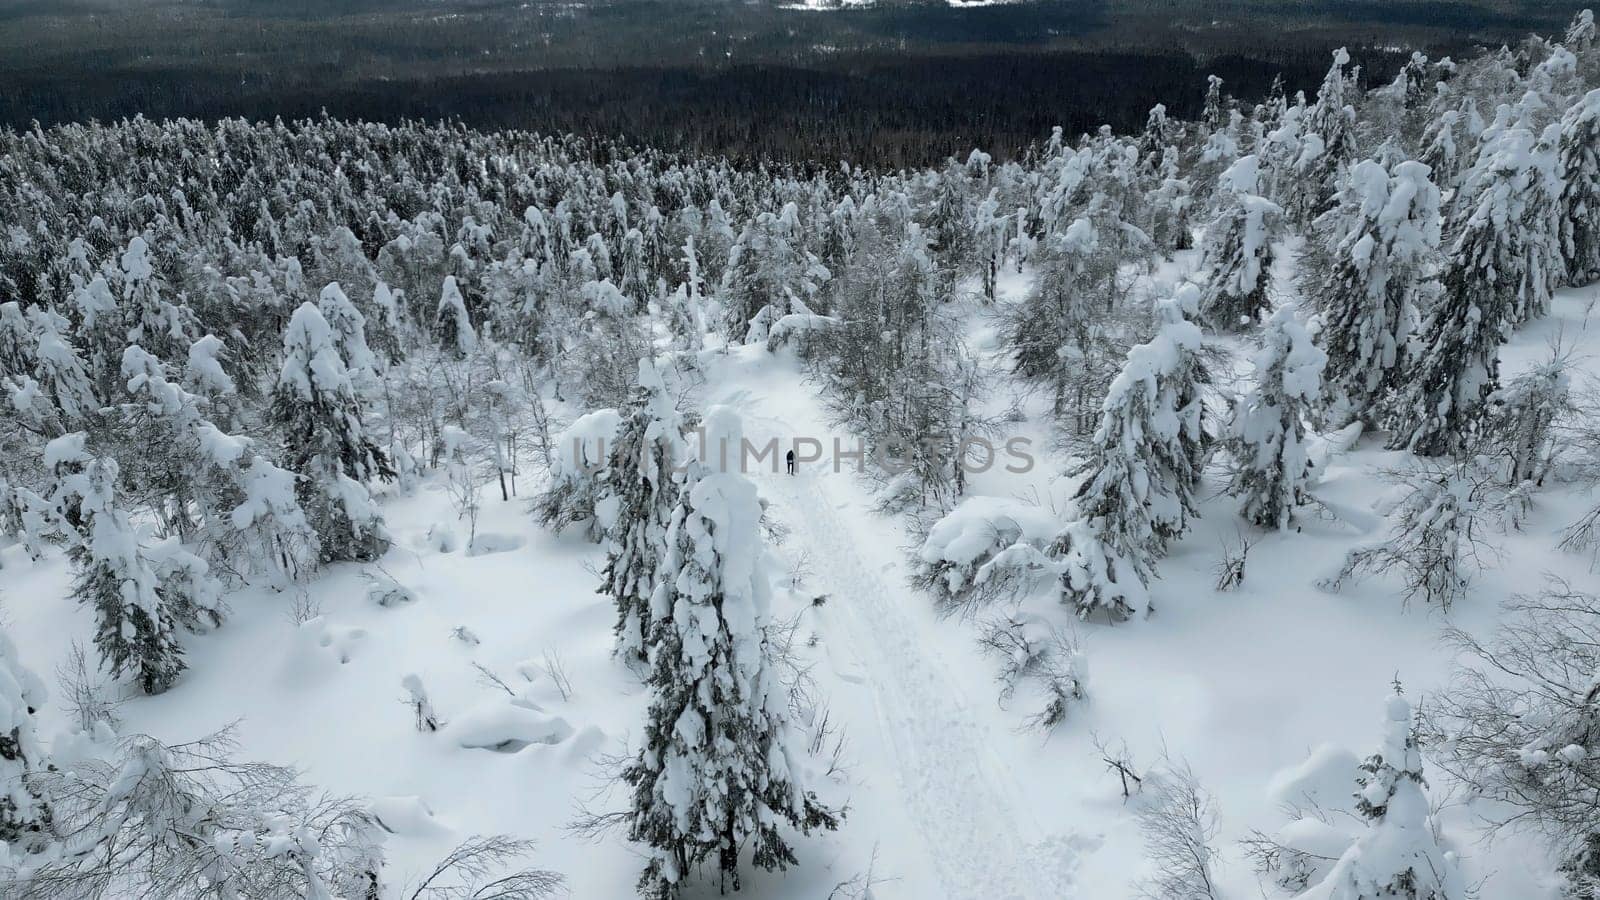 Aerial top down view of hikers walking one by one in winter forest. Clip. Travelers exploring snowy forest